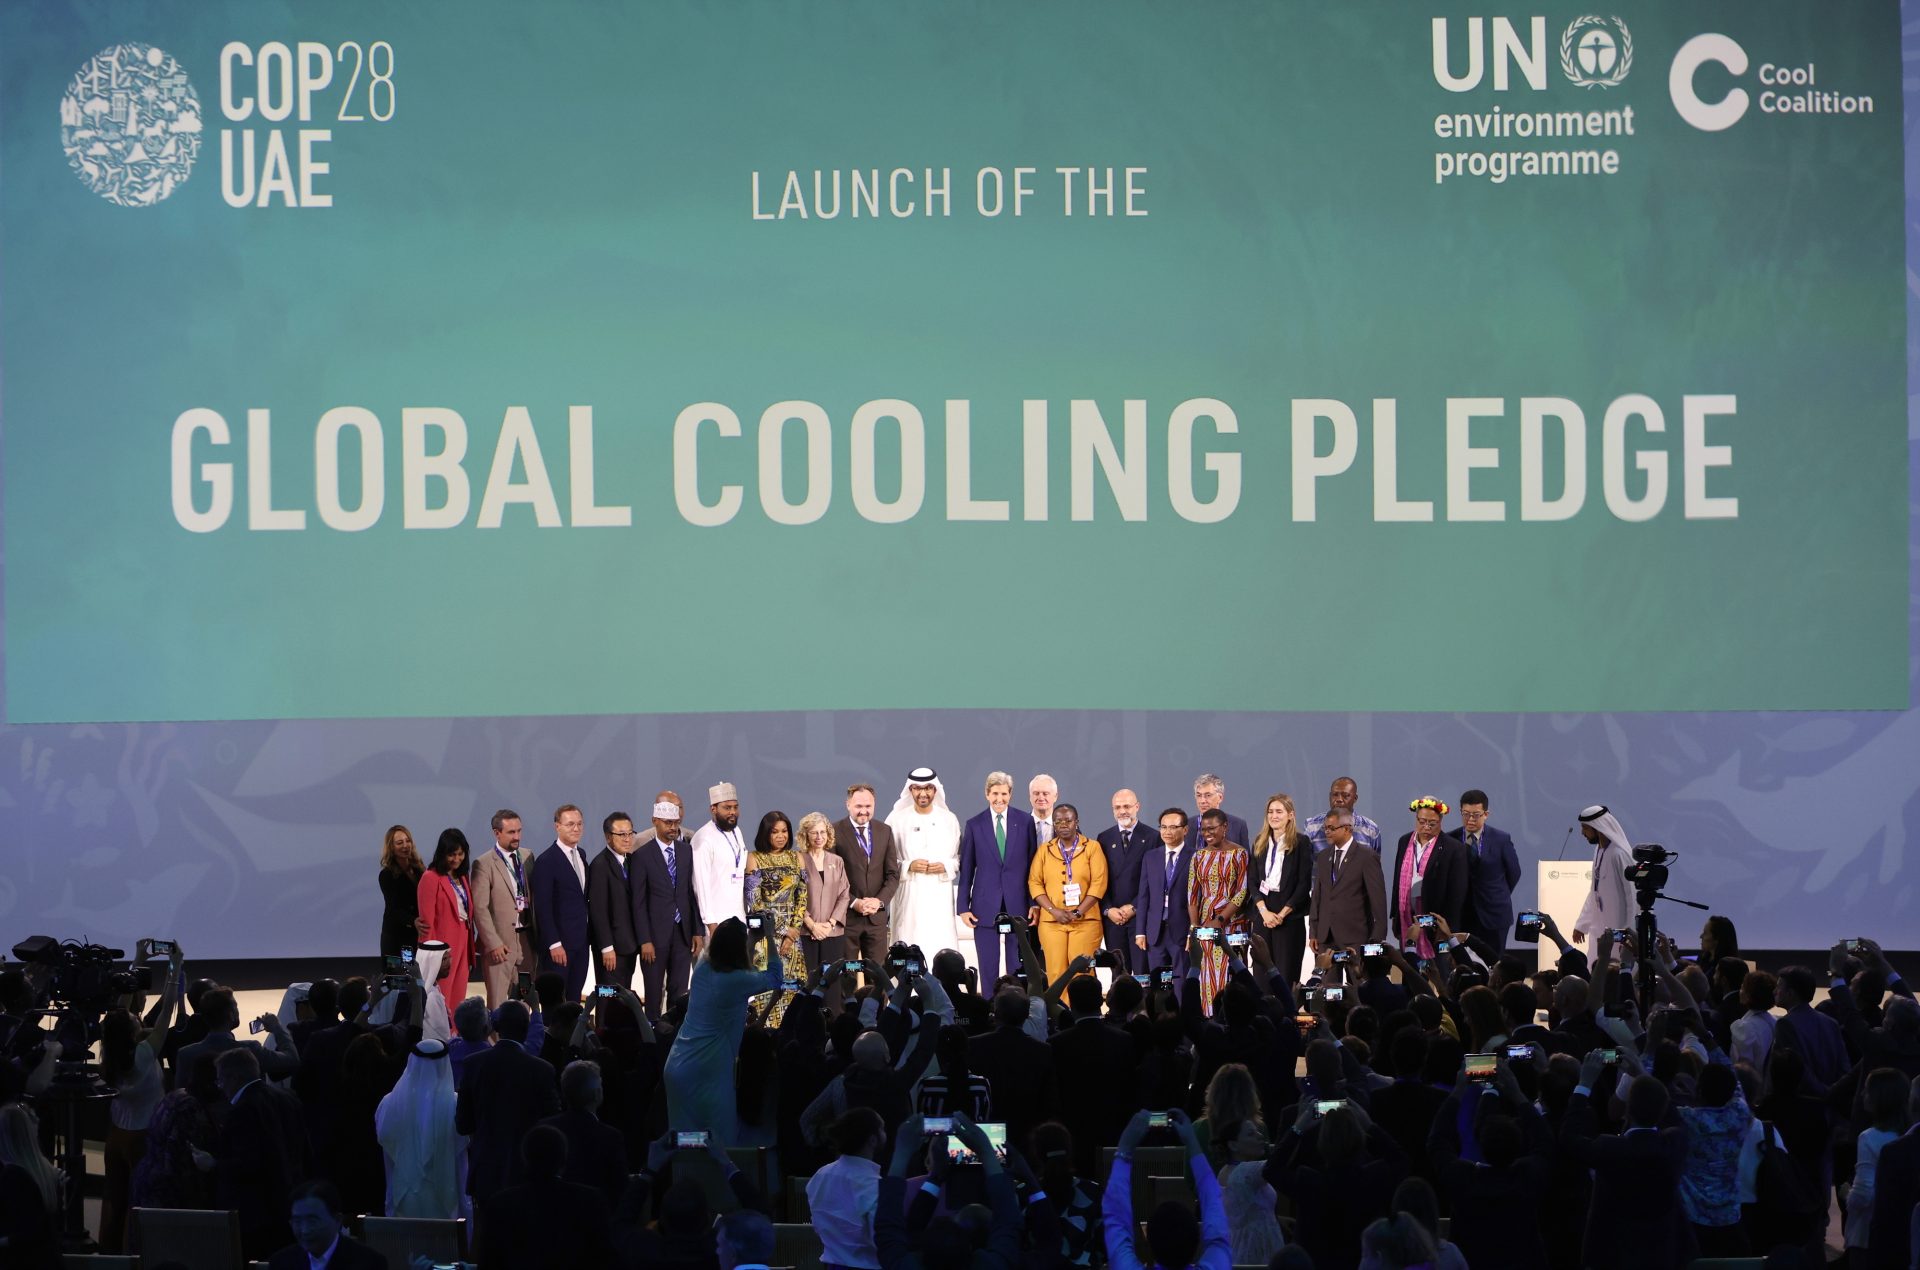 Dubai (United Arab Emirates), 05/12/2023.- Executive Director UNEP Inger Andersen (9-L), President-Designate of COP28 and UAE's Minister for Industry and Advanced Technology Dr. Sultan Ahmed Al Jaber (C) and US Special Presidential Envoy for Climate John Kerry (C-R) pose with other attendess for a family photo after the launch of Global Cooling Pledge session during the 2023 United Nations Climate Change Conference (COP28) at Expo City Dubai in Dubai, UAE, 05 December 2023. The 2023 United Nations Climate Change Conference (COP28), runs from 30 November to 12 December, and is expected to host one of the largest number of participants in the annual global climate conference as over 70,000 estimated attendees, including the member states of the UN Framework Convention on Climate Change (UNFCCC), business leaders, young people, climate scientists, Indigenous Peoples and other relevant stakeholders will attend. EFE/EPA/ALI HAIDER